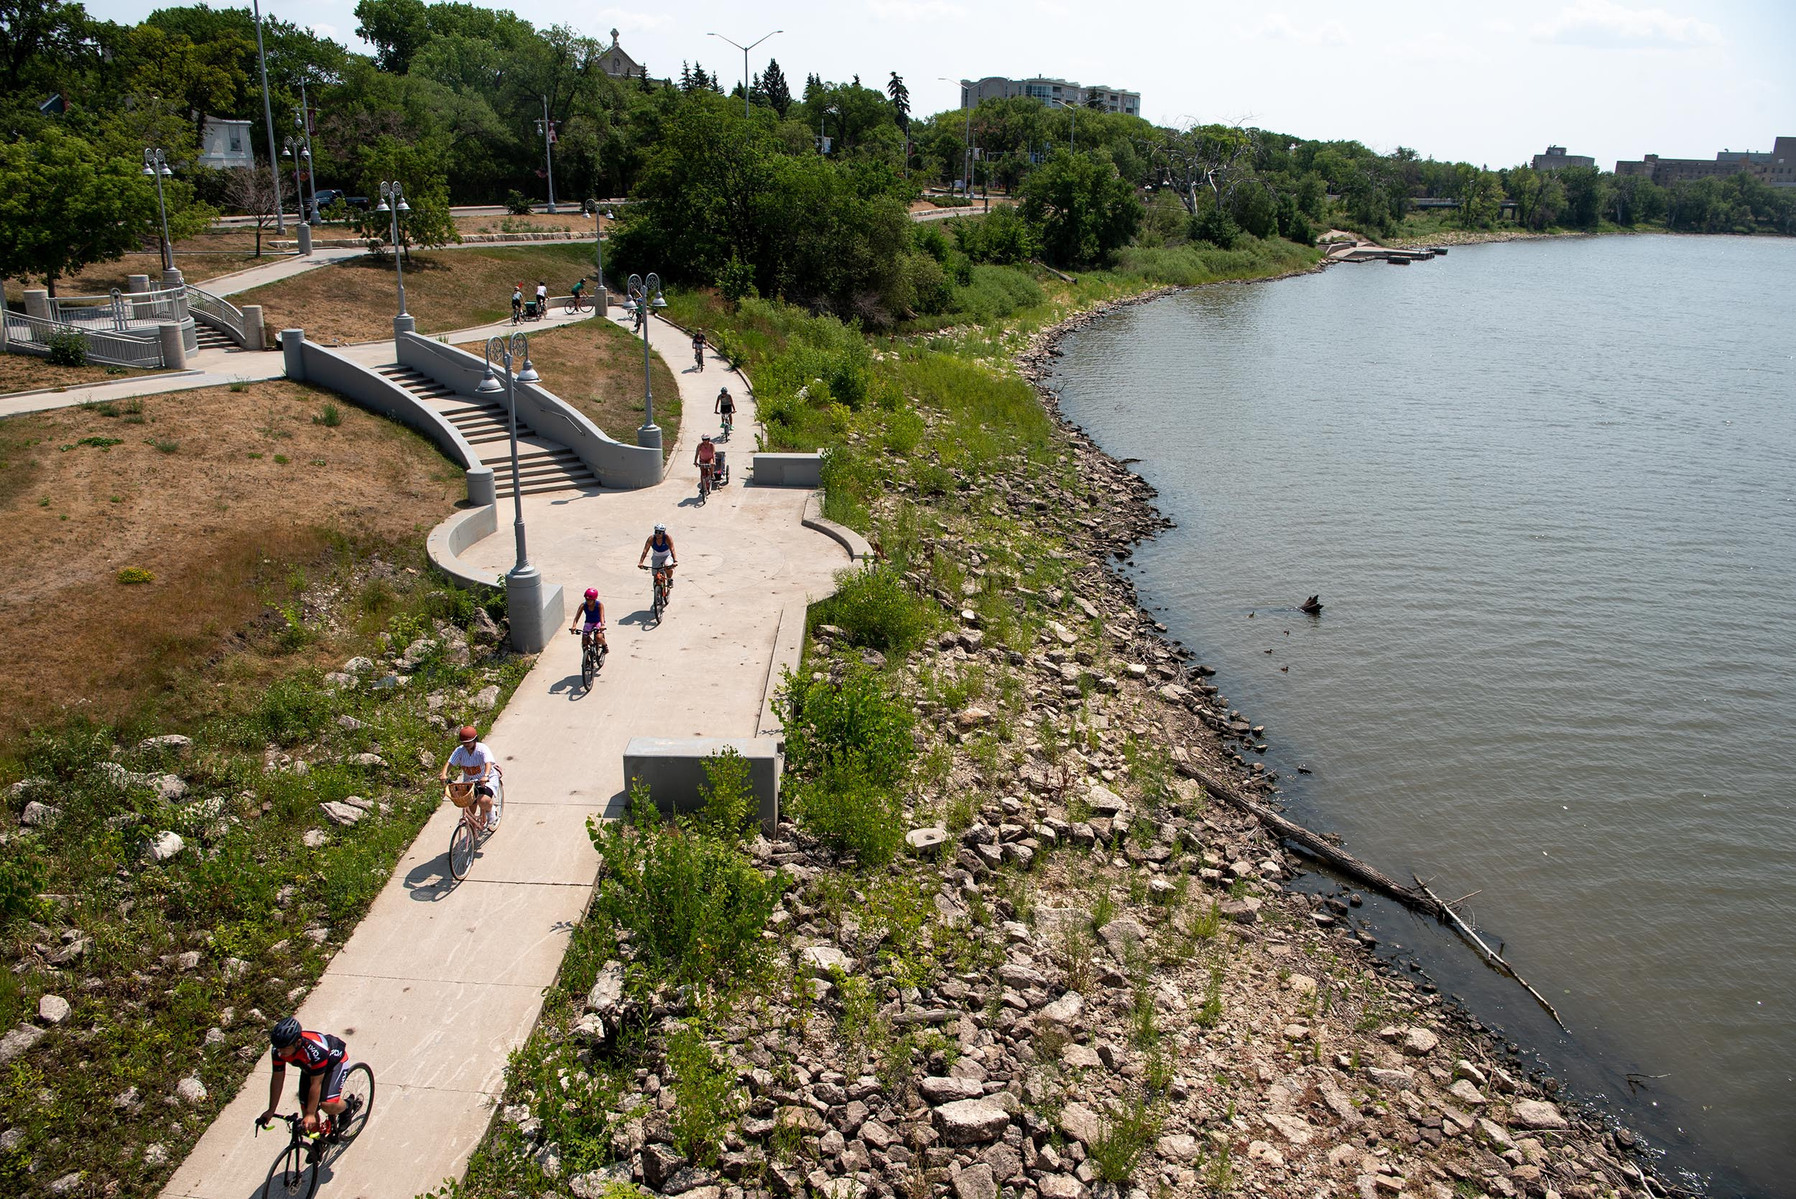 Cyclists taking part in the Tour de Glace, a 20-kilometre recreational event that makes stops at four local ice cream shops, ride below Esplanade Riel in Winnipeg on July 24, 2021. Photo by Alex Lupul